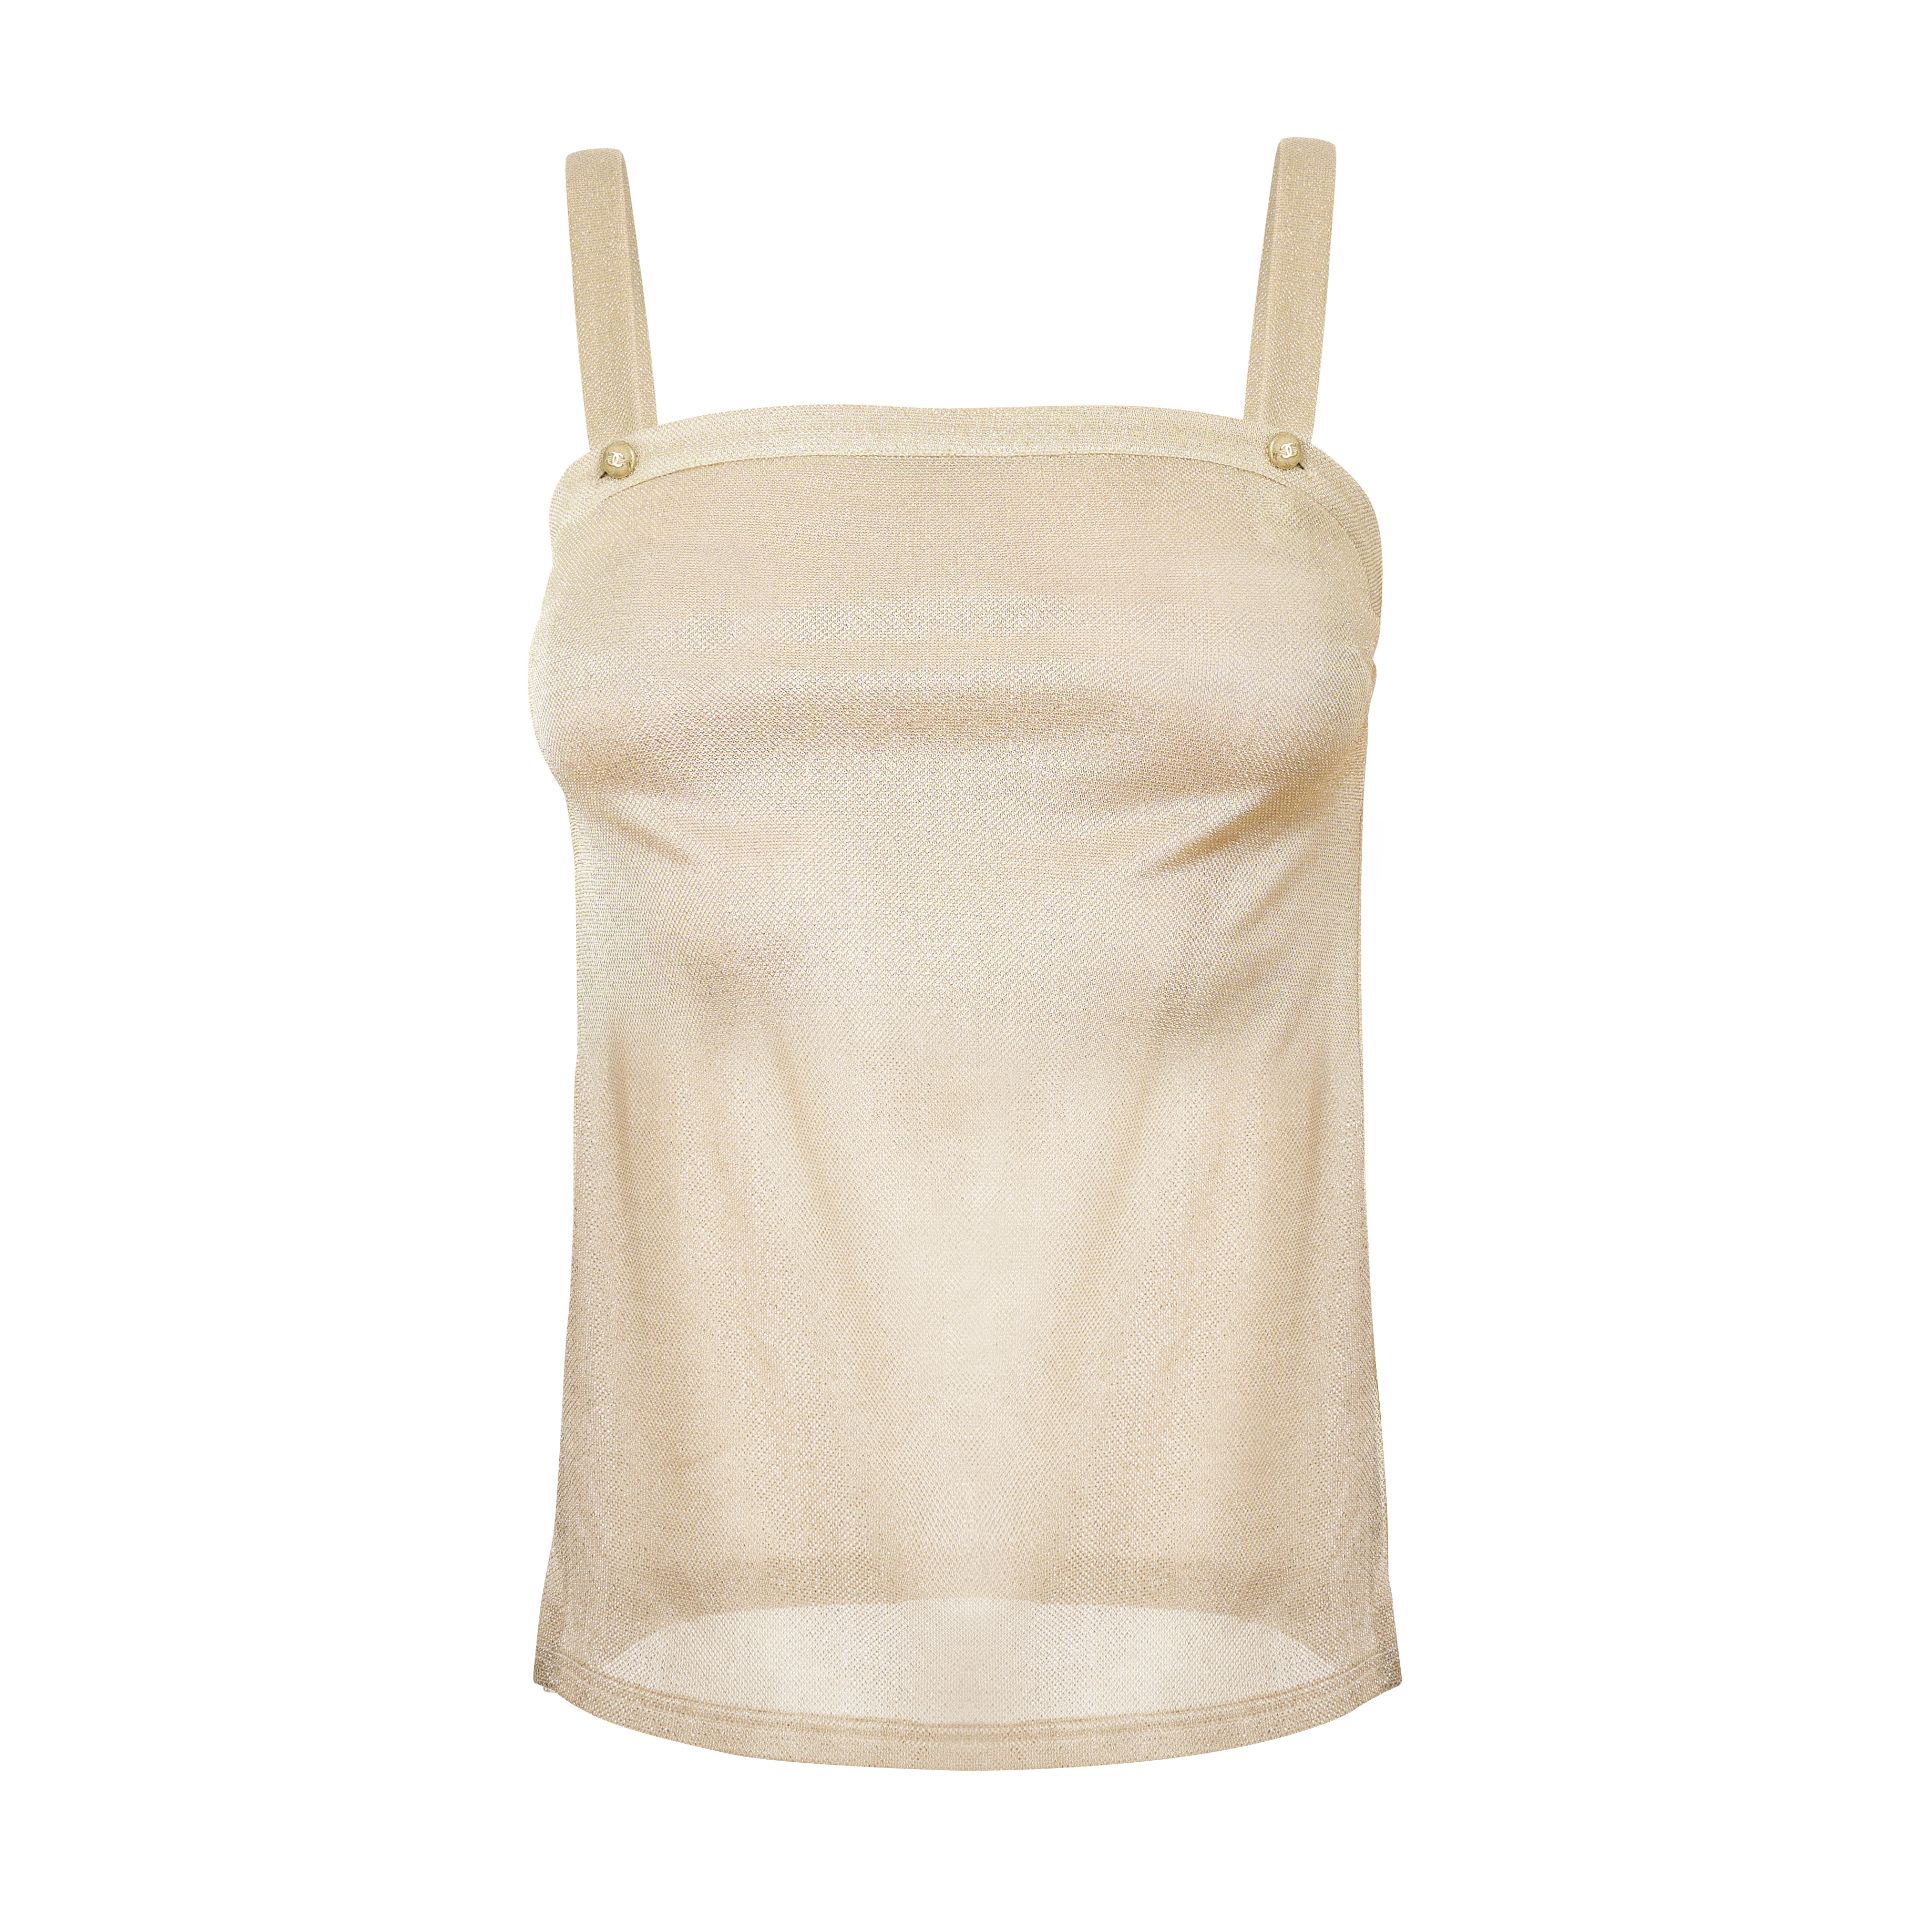 CHANEL SPARKLY SHEER TOP Condition grade A-. French size 34. 70m chest, 45cm length. Light gold ...